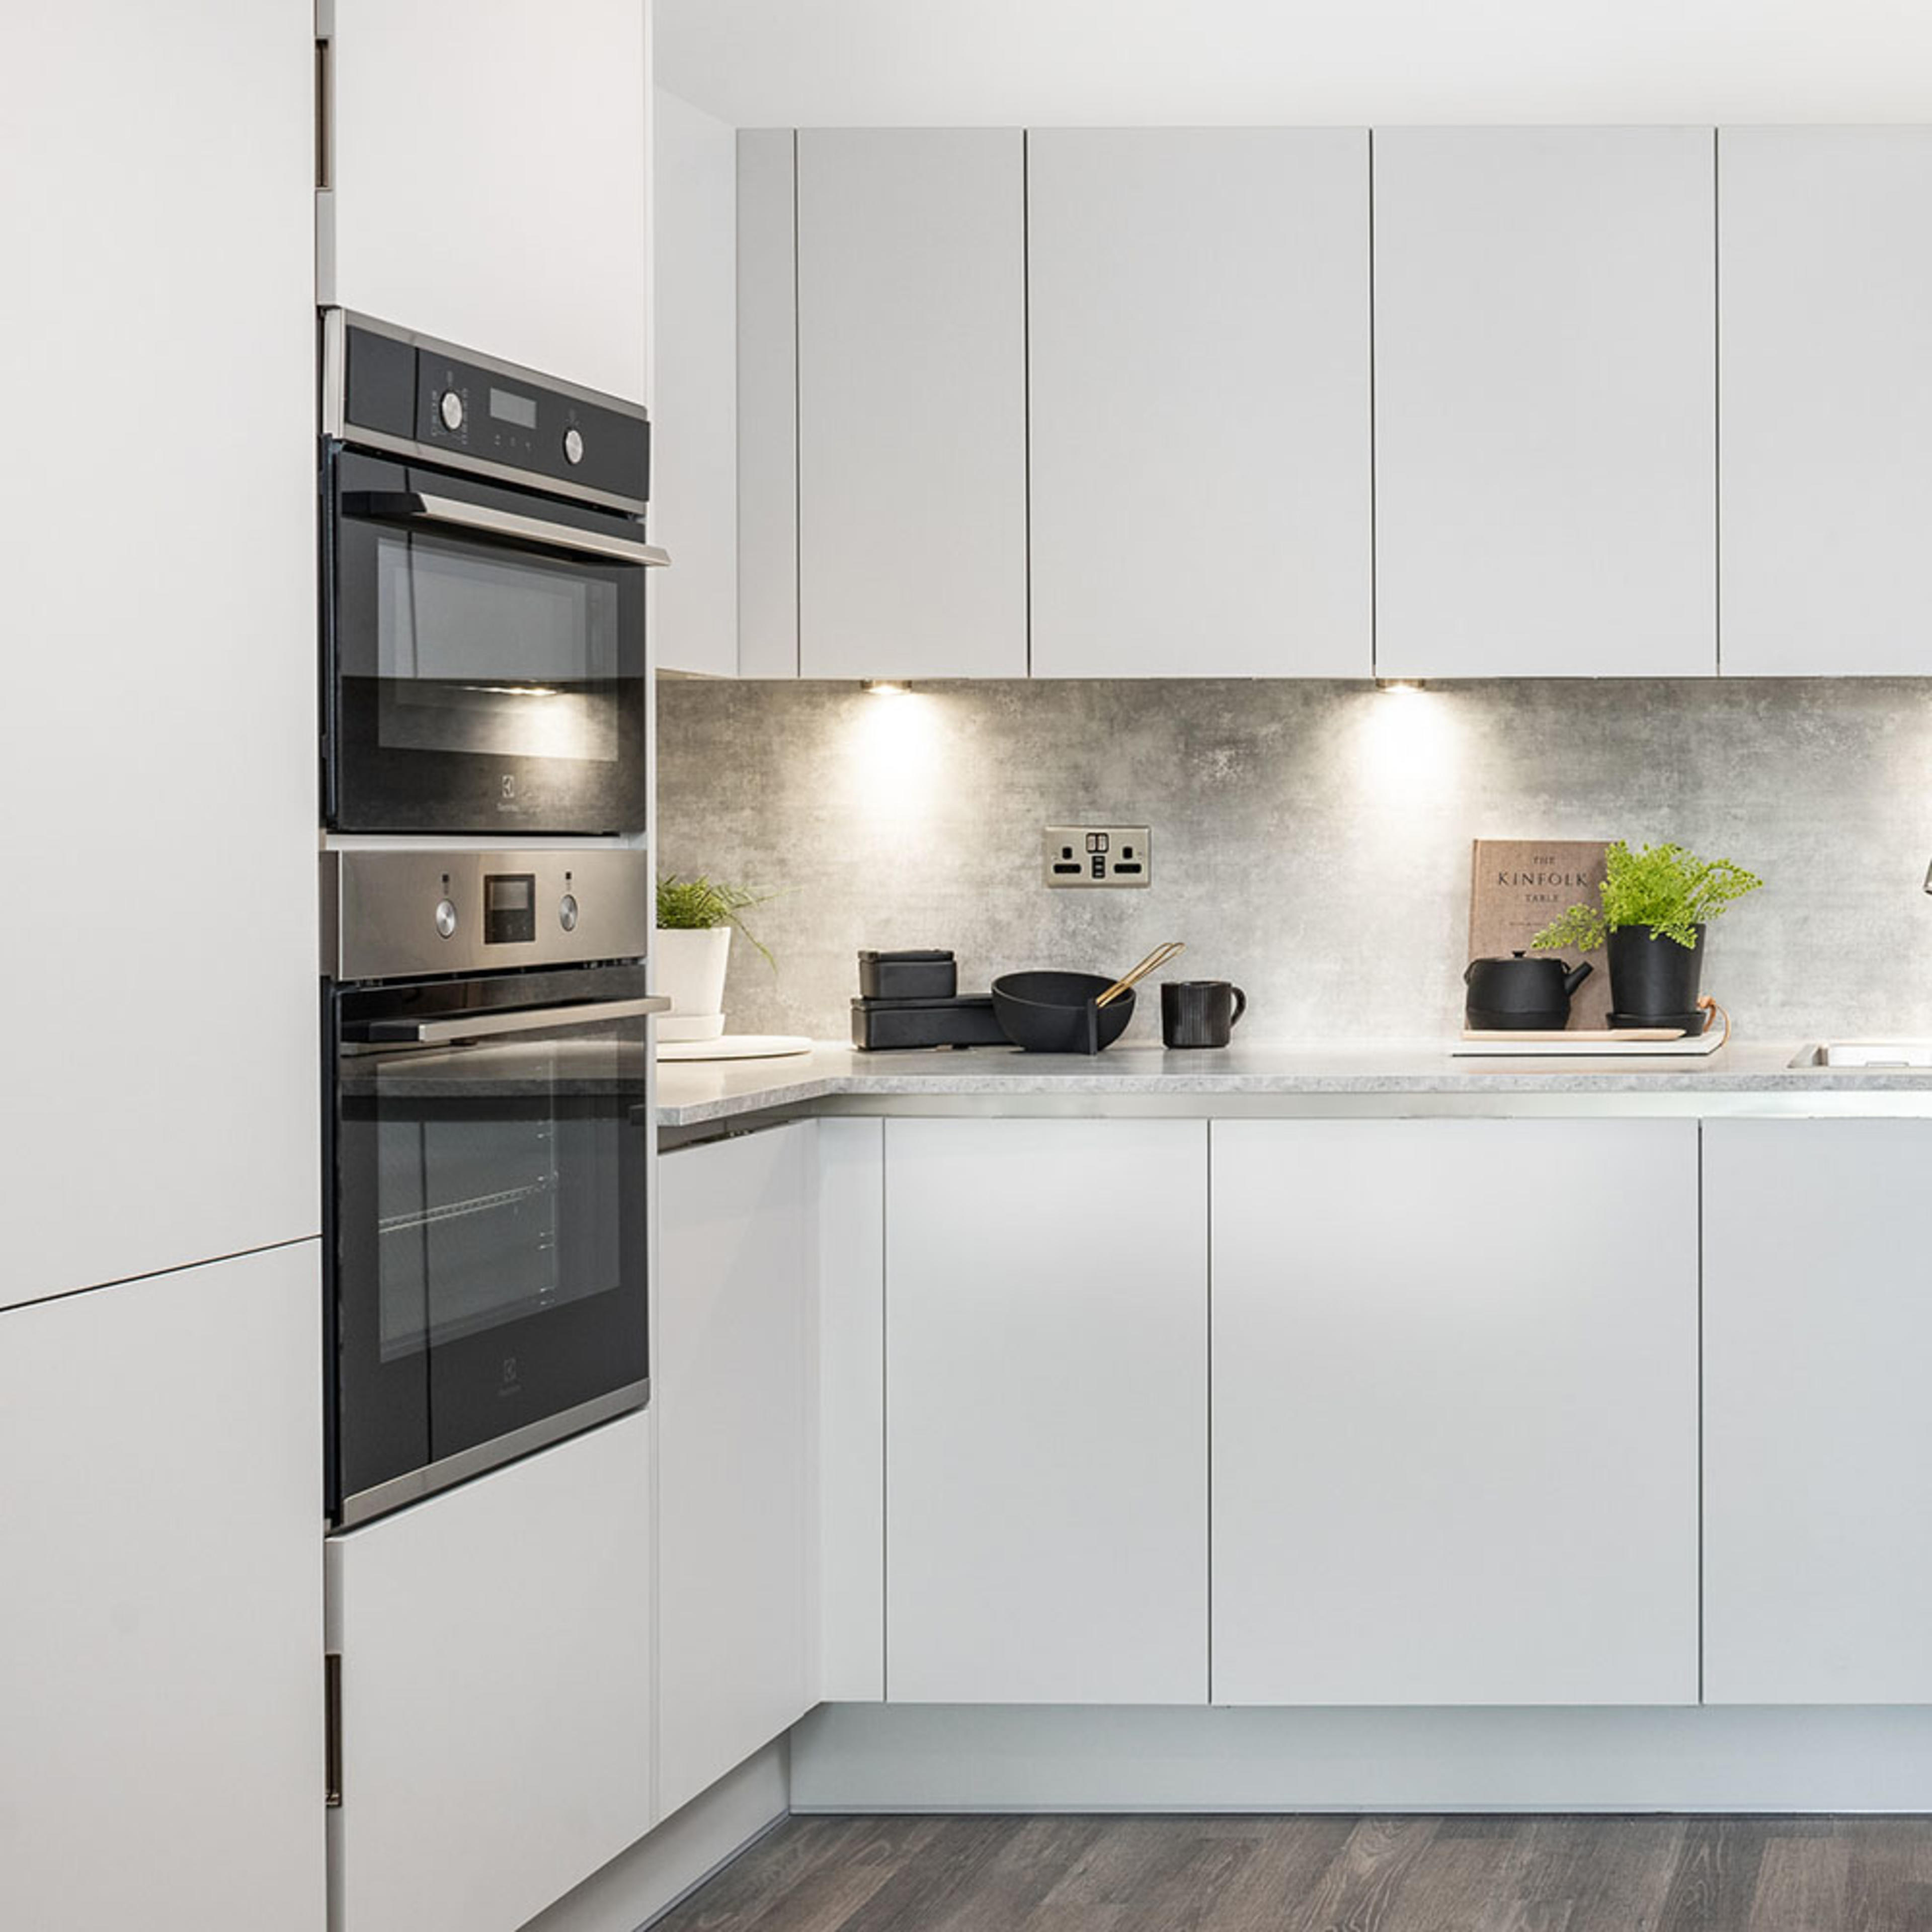 persona-homes-specification-kitchen-double-oven-white-units-wood-floor